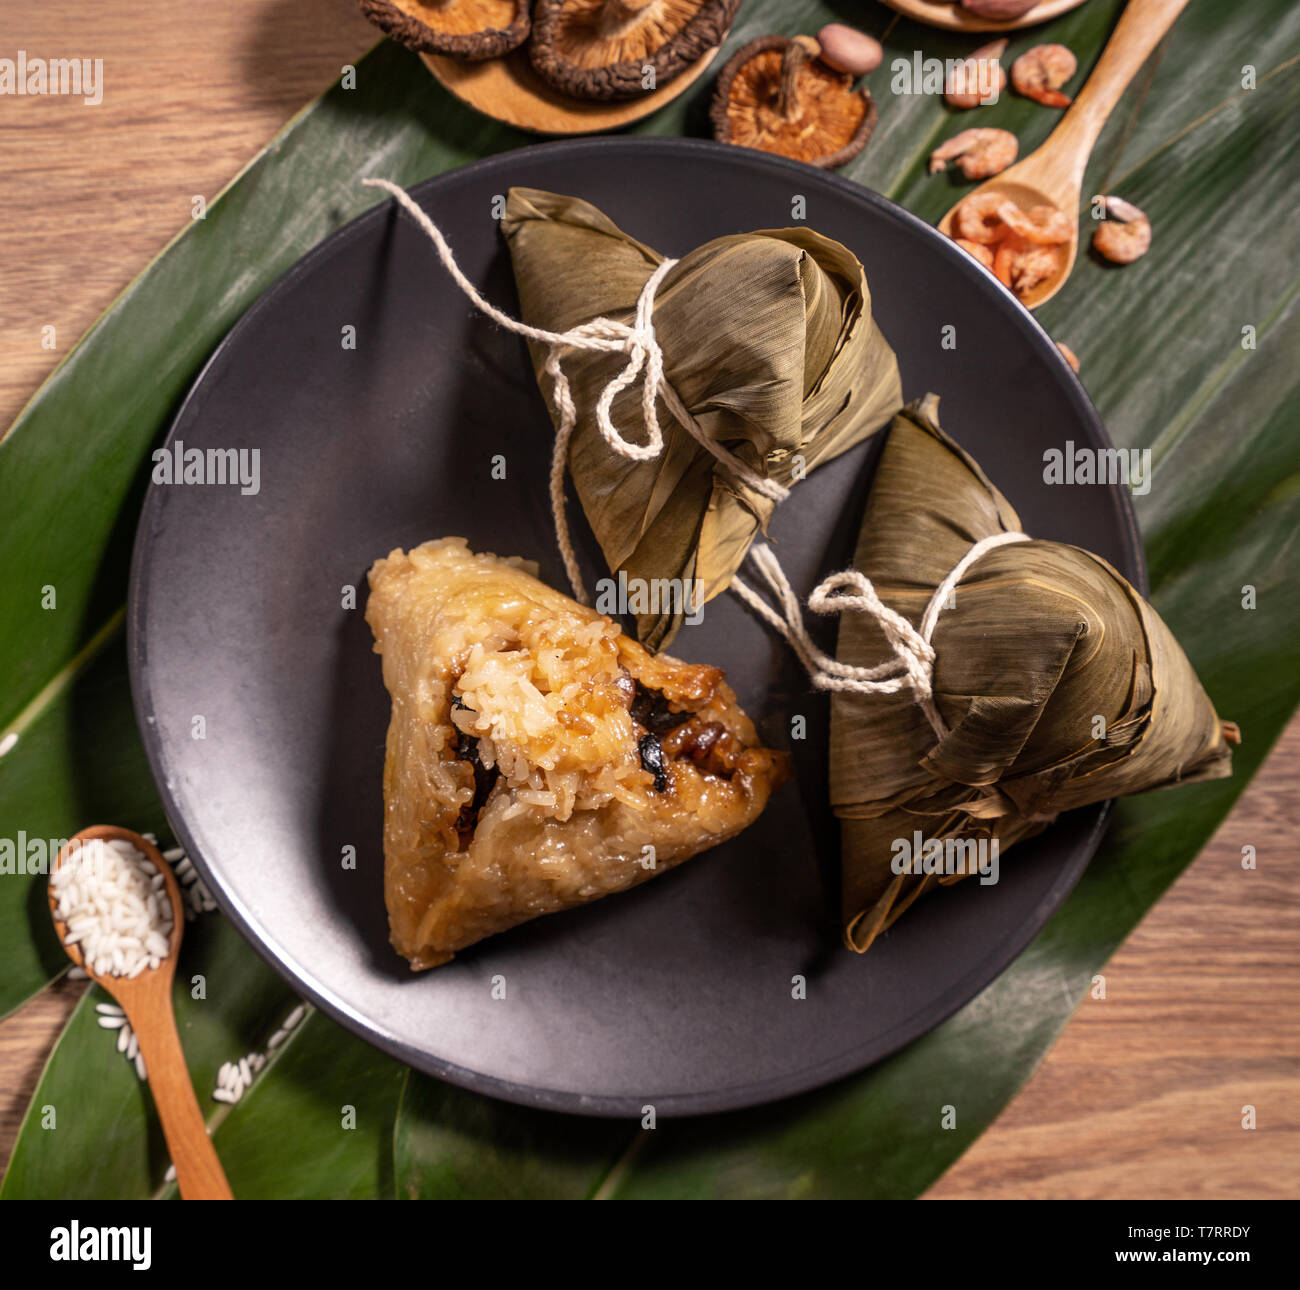 Zongzi, steamed rice dumplings on wooden table bamboo leaves, food in dragon boat festival duanwu concept, close up, copy space, top view, flat lay Stock Photo